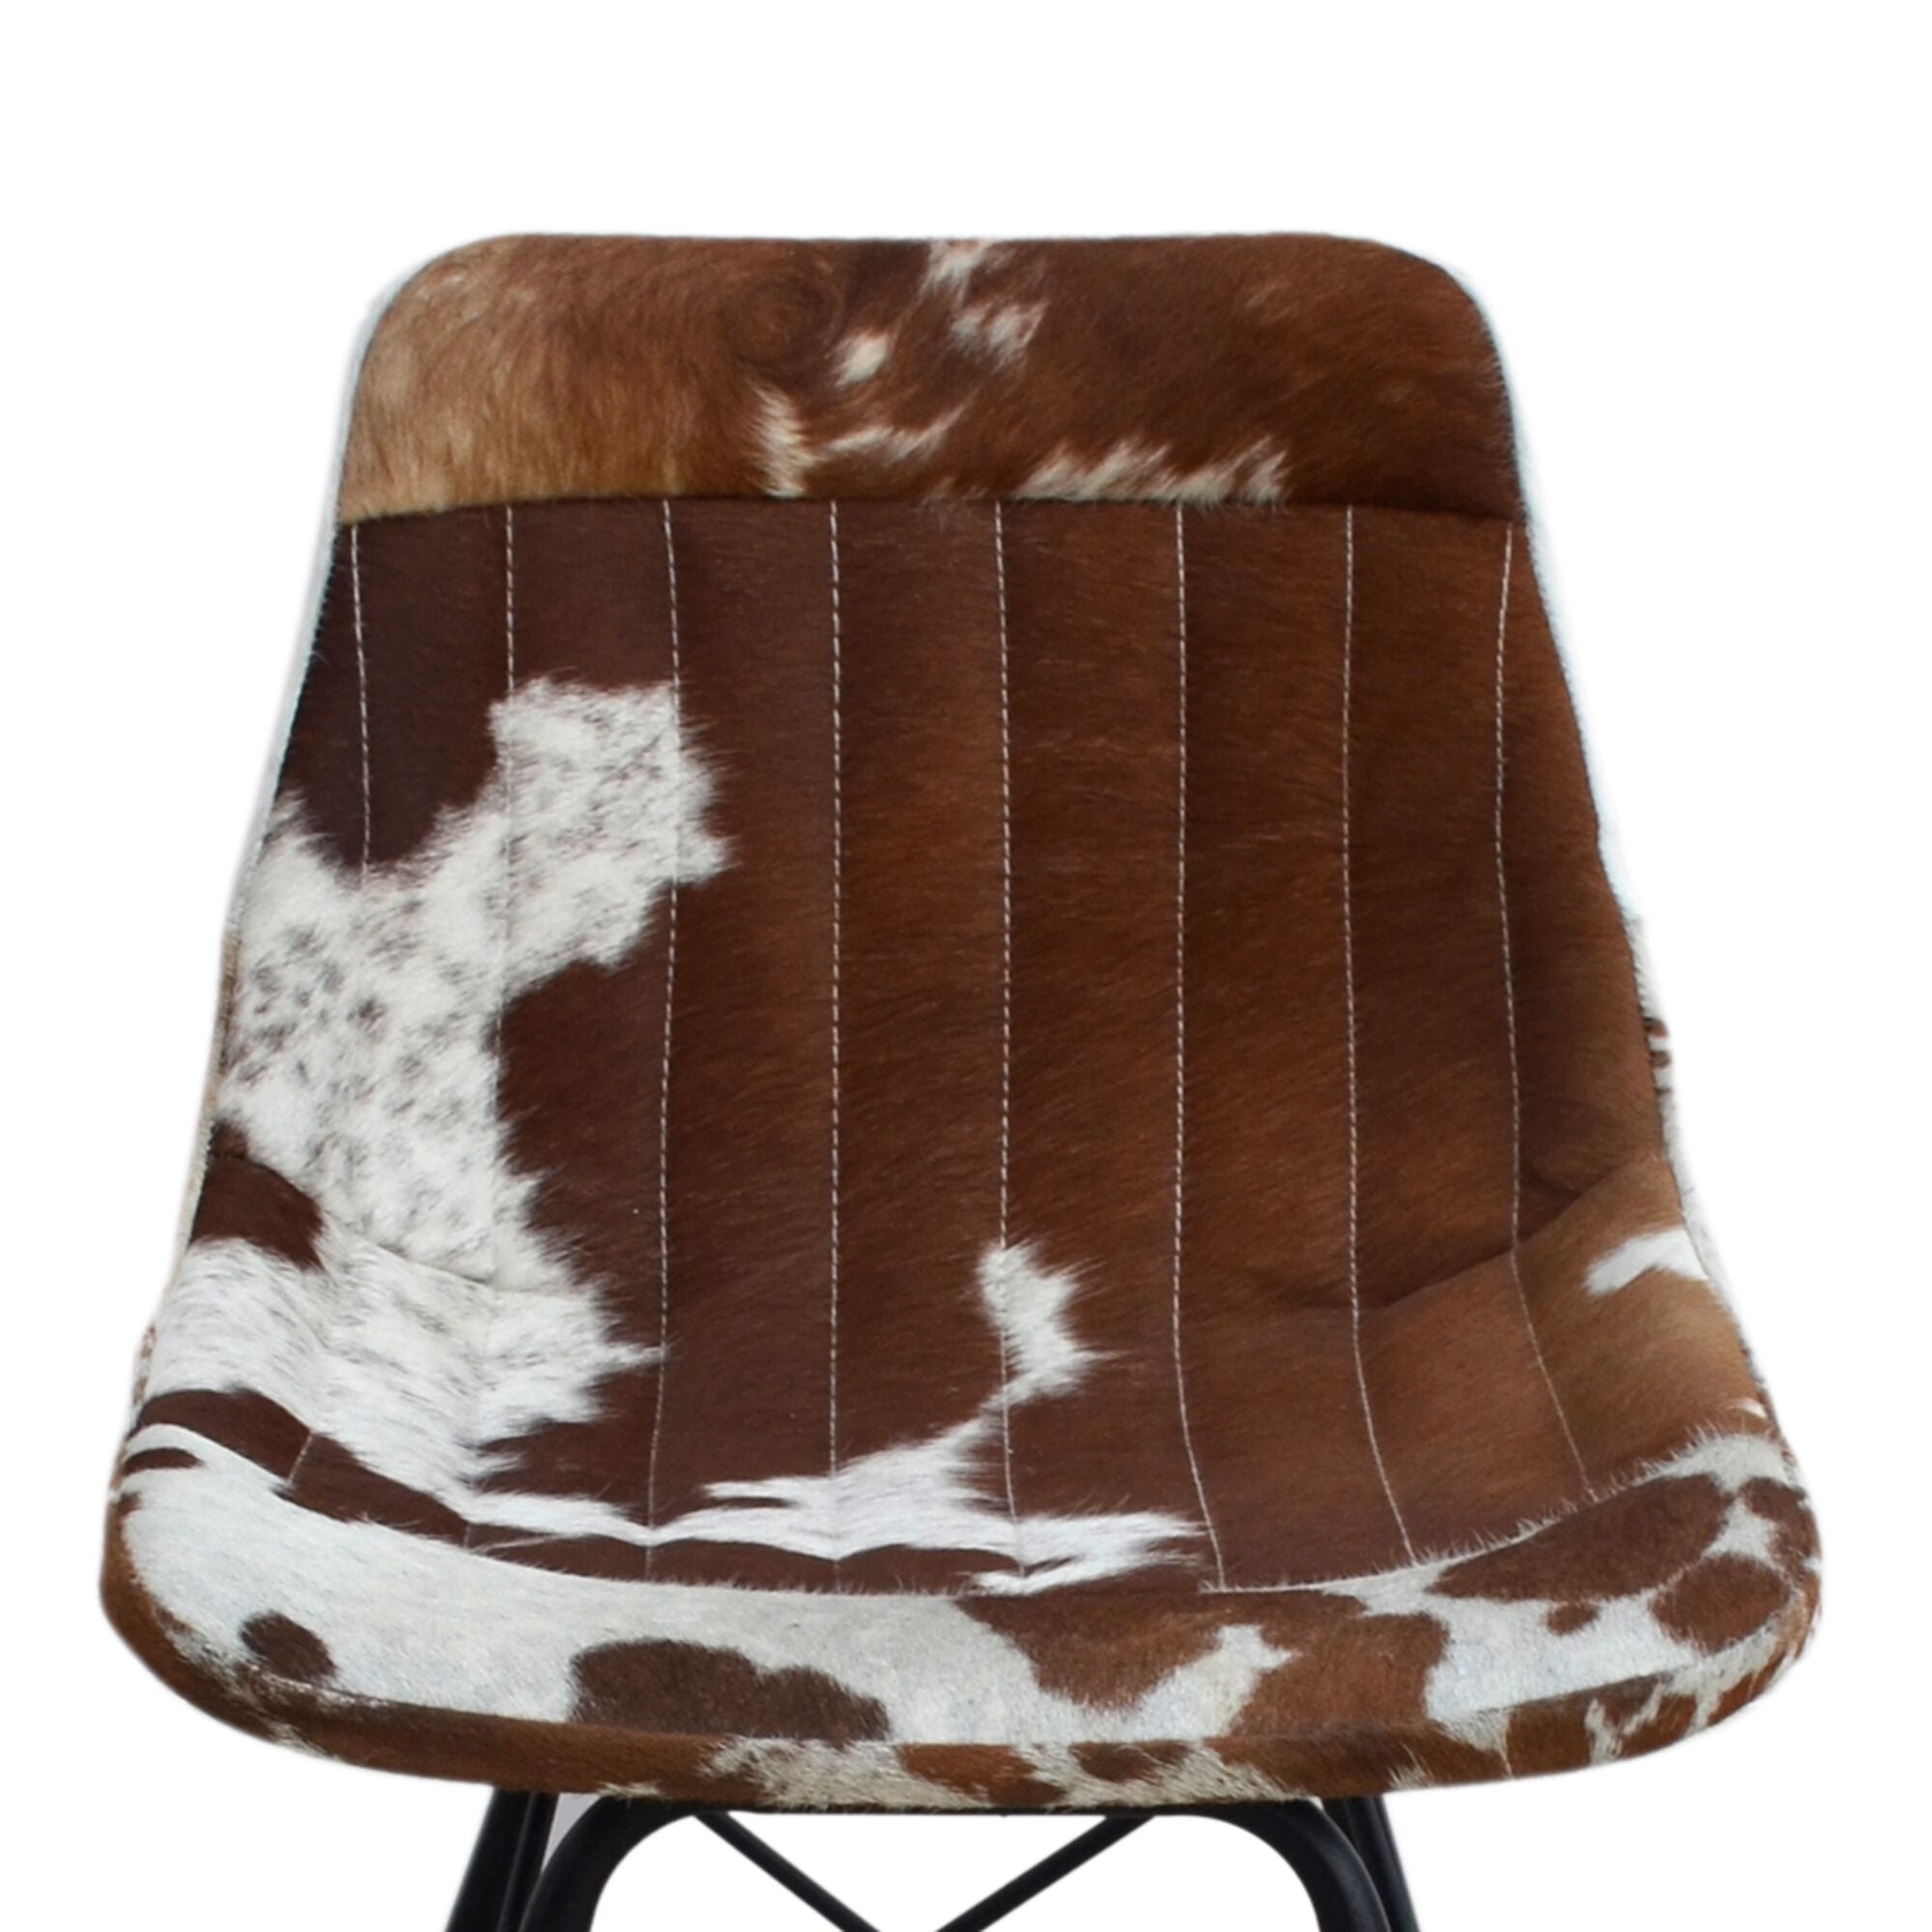 Eames Style Cowhide Chair - Notbrand